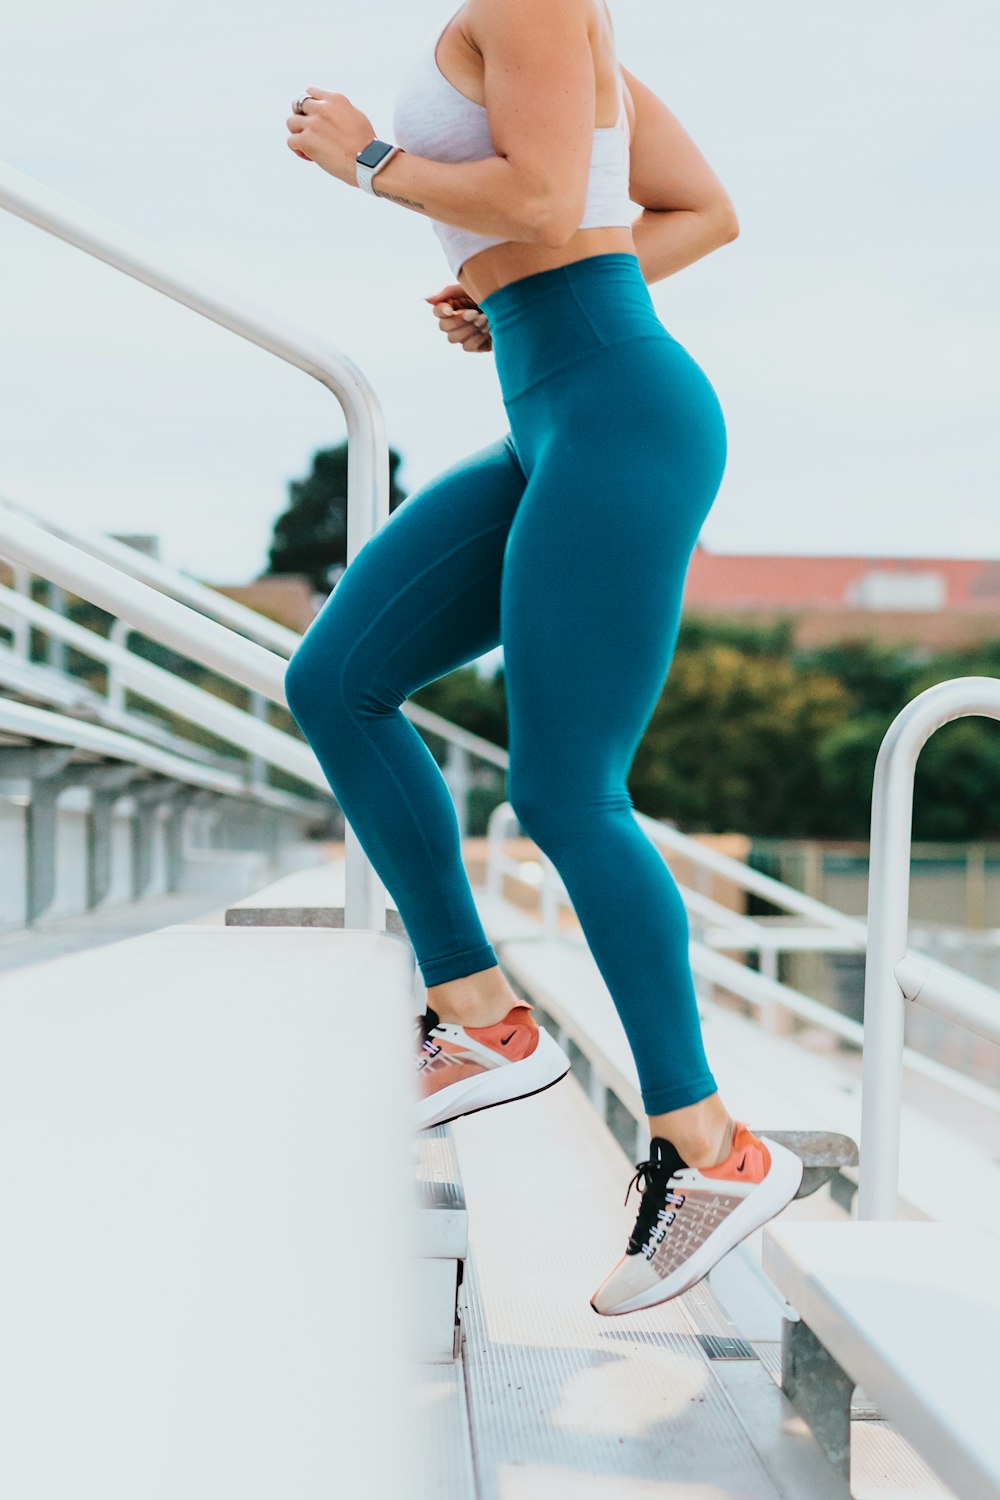 Sport Clothes Pictures  Download Free Images on Unsplash